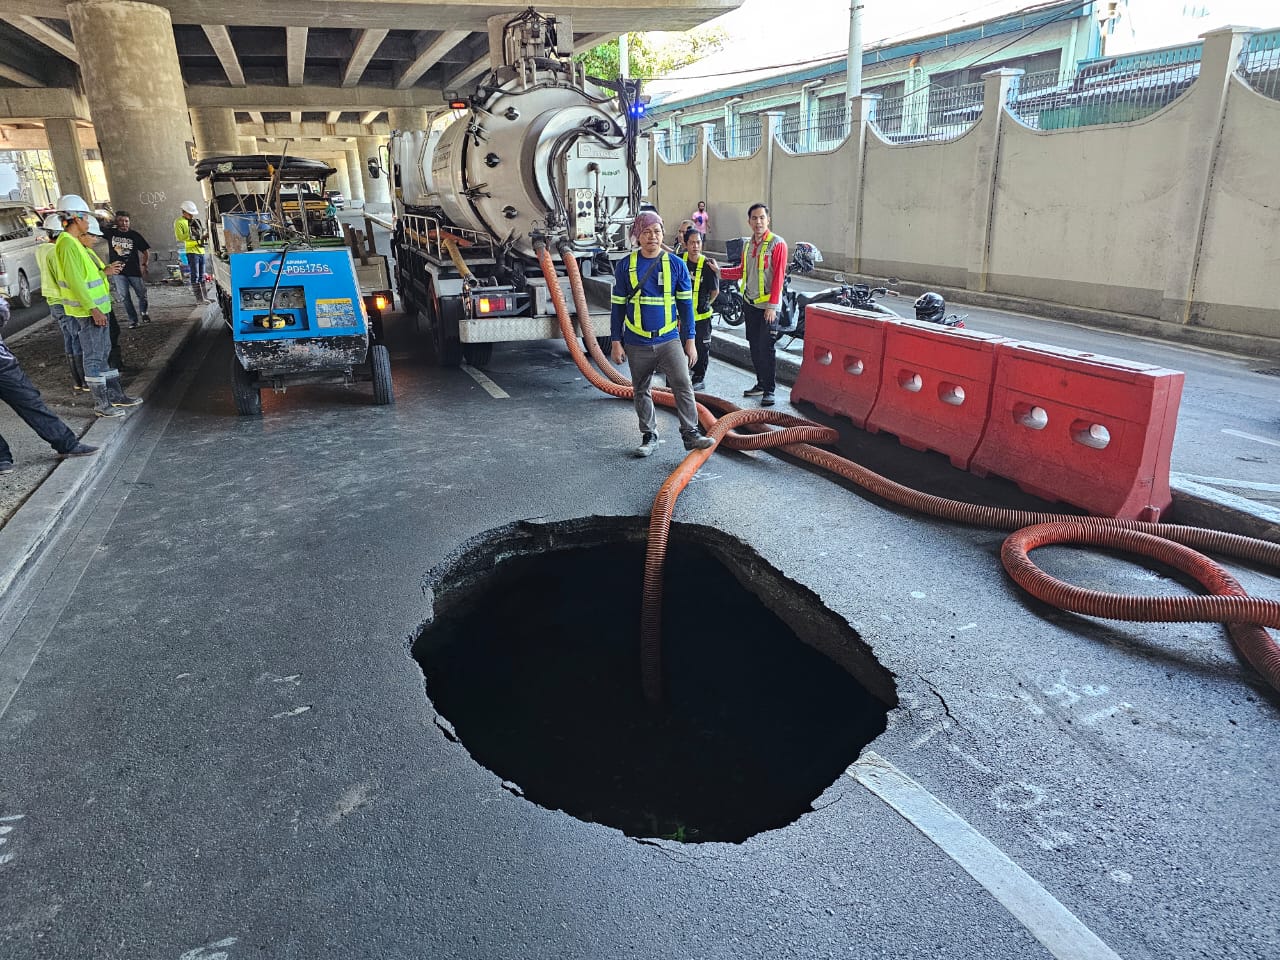 A photo taken by INQUIRER.net around 2:33 p.m. showed that the hole had gotten deeper and wider.